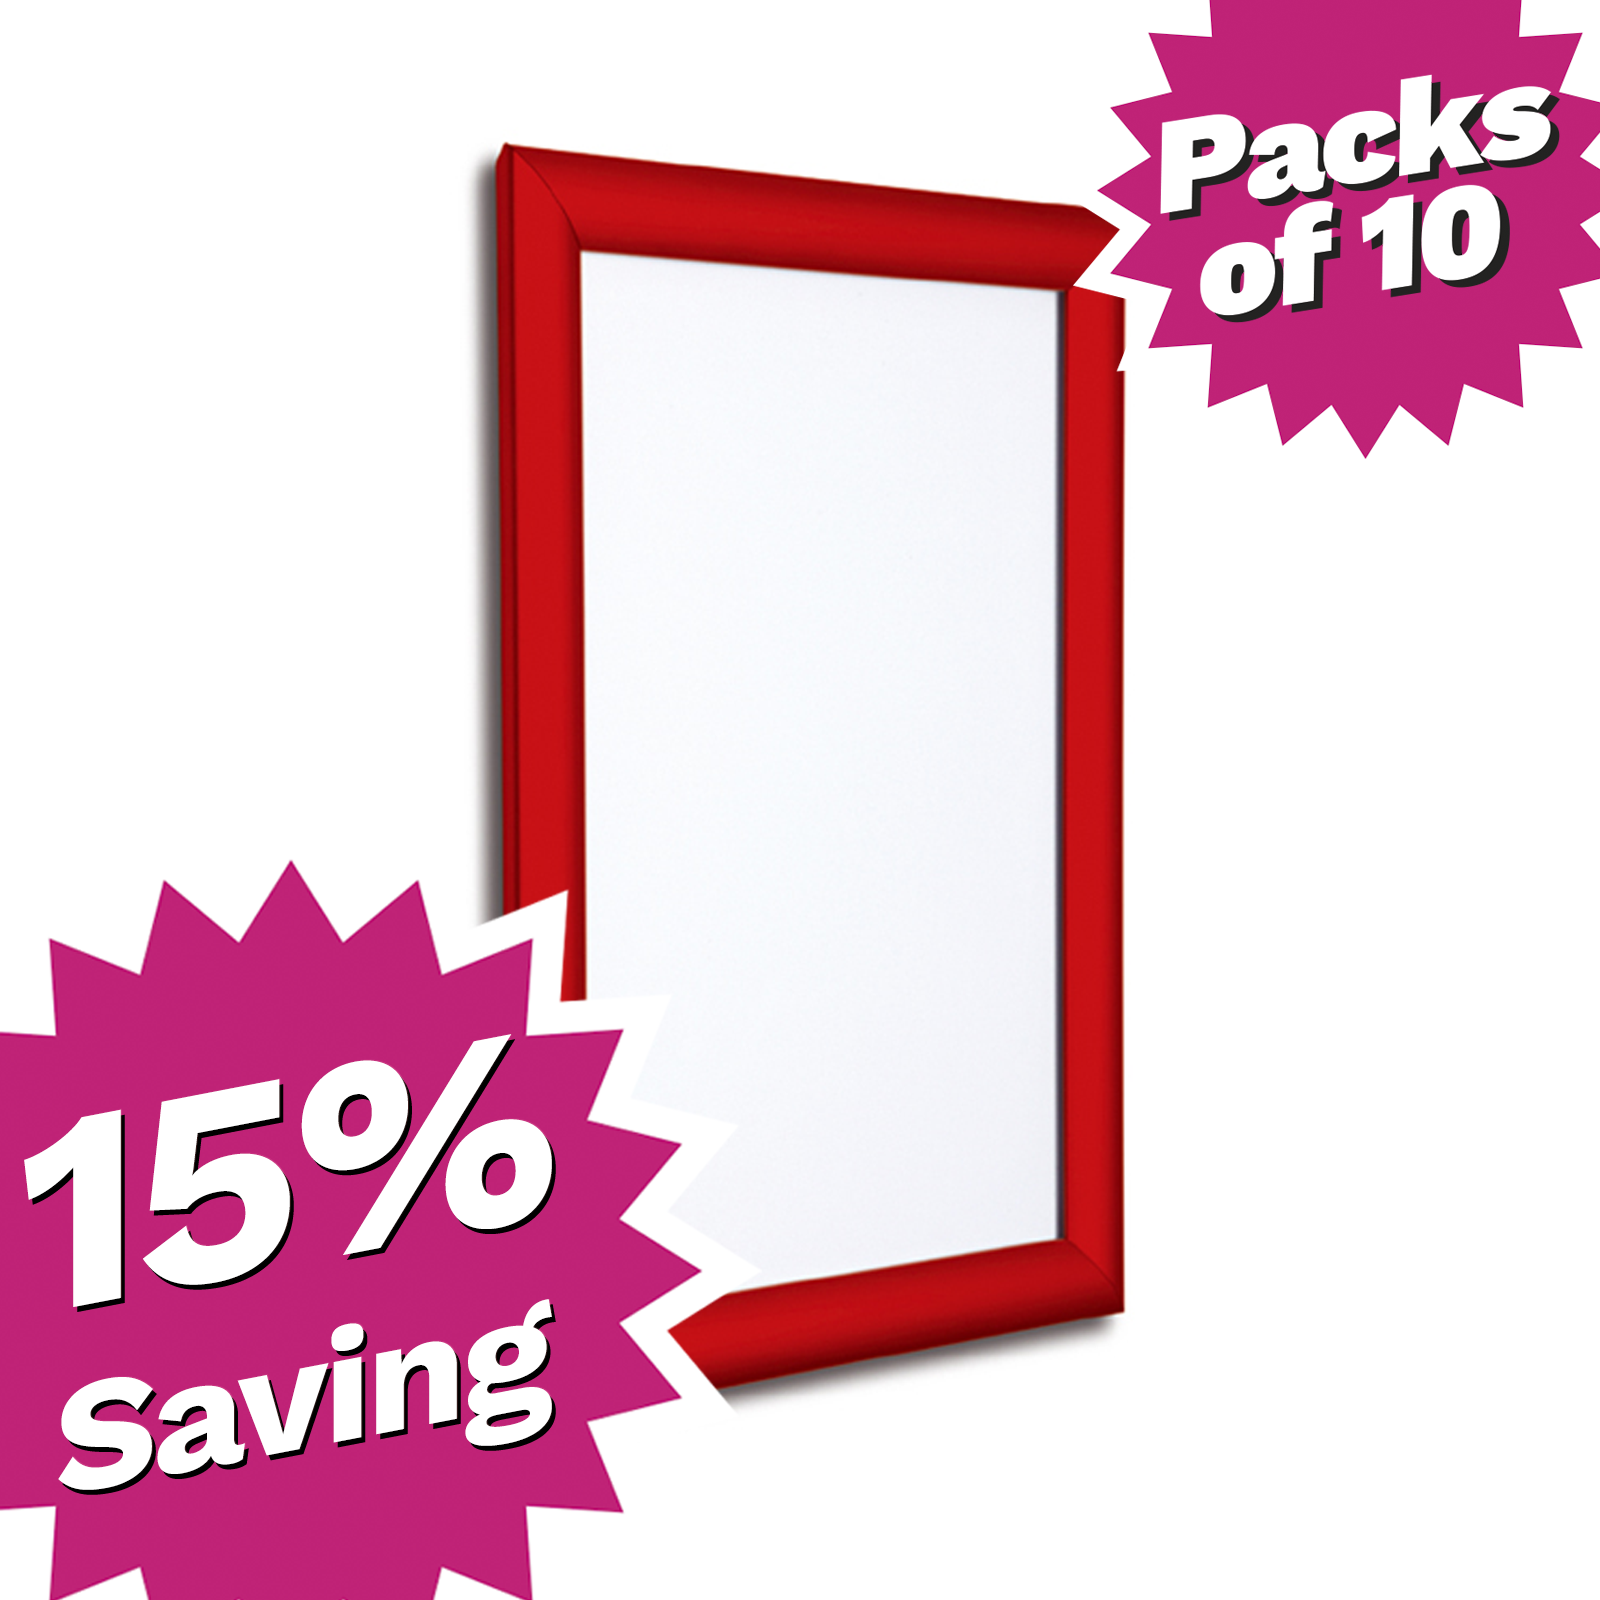 Red Love Frame Discount Promotion PNG